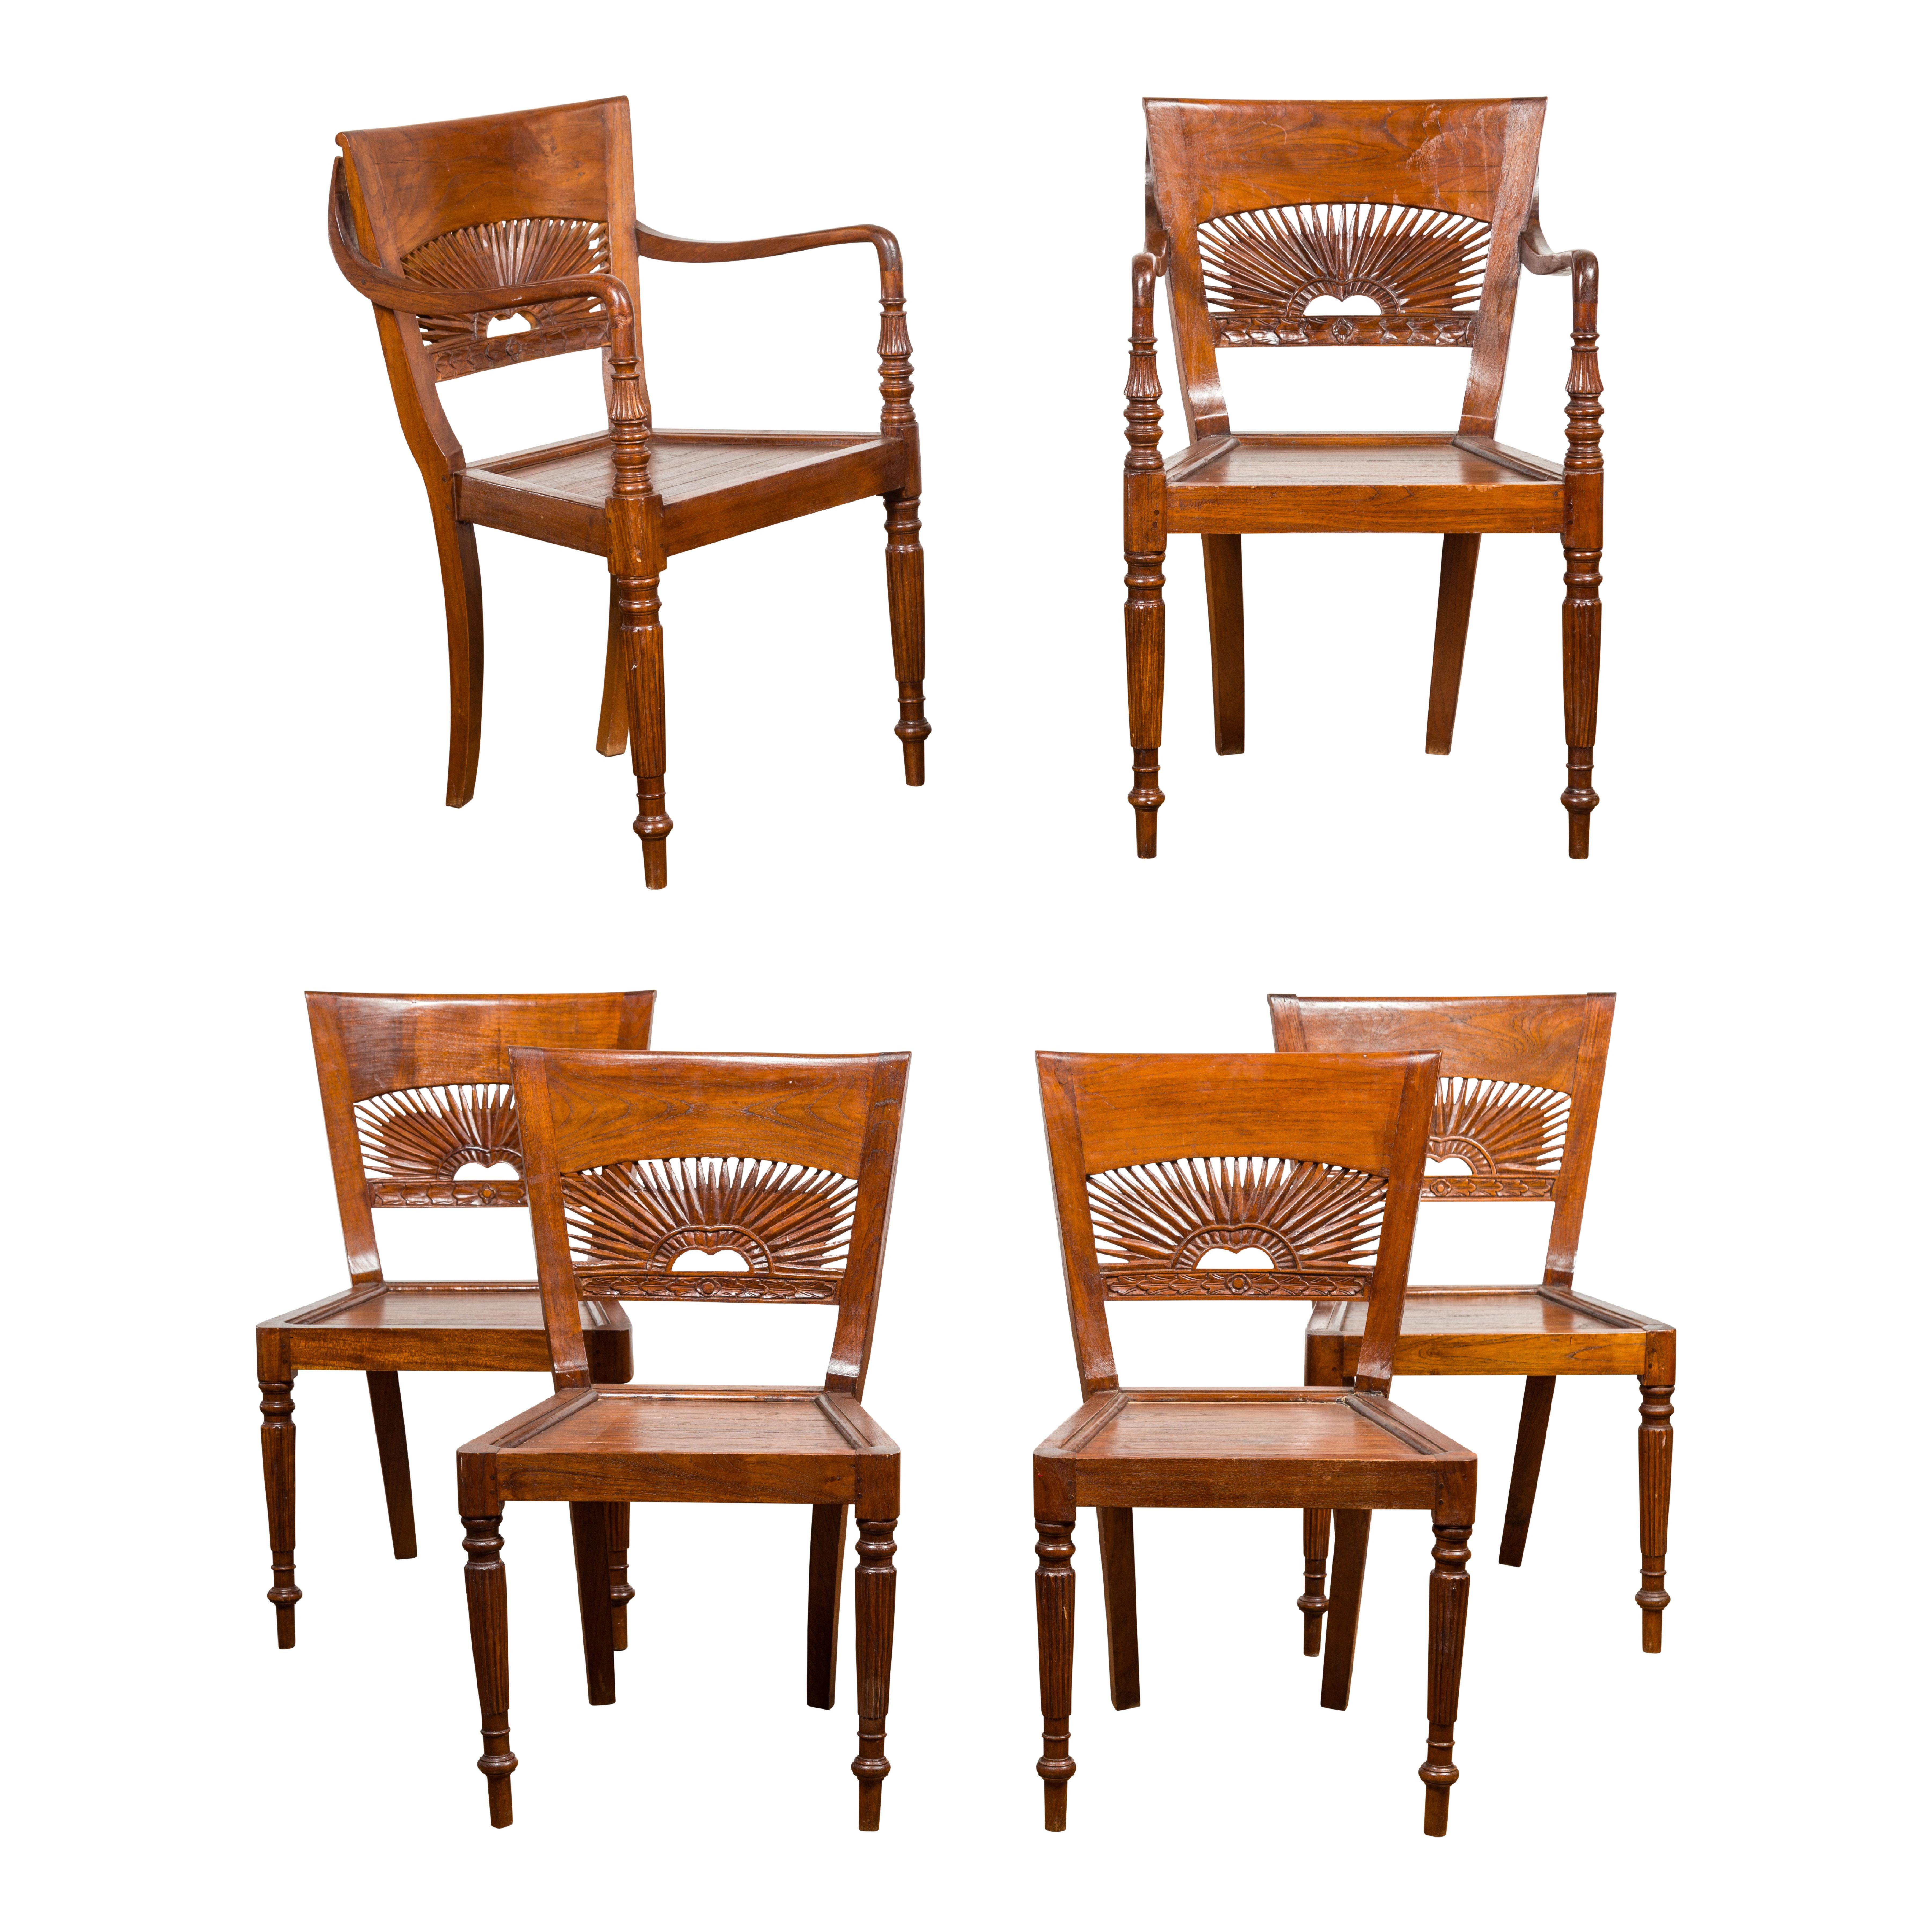 Dutch Colonial Teak Dining Room Chairs with Carved Radiating Backs, Set of Six For Sale 12